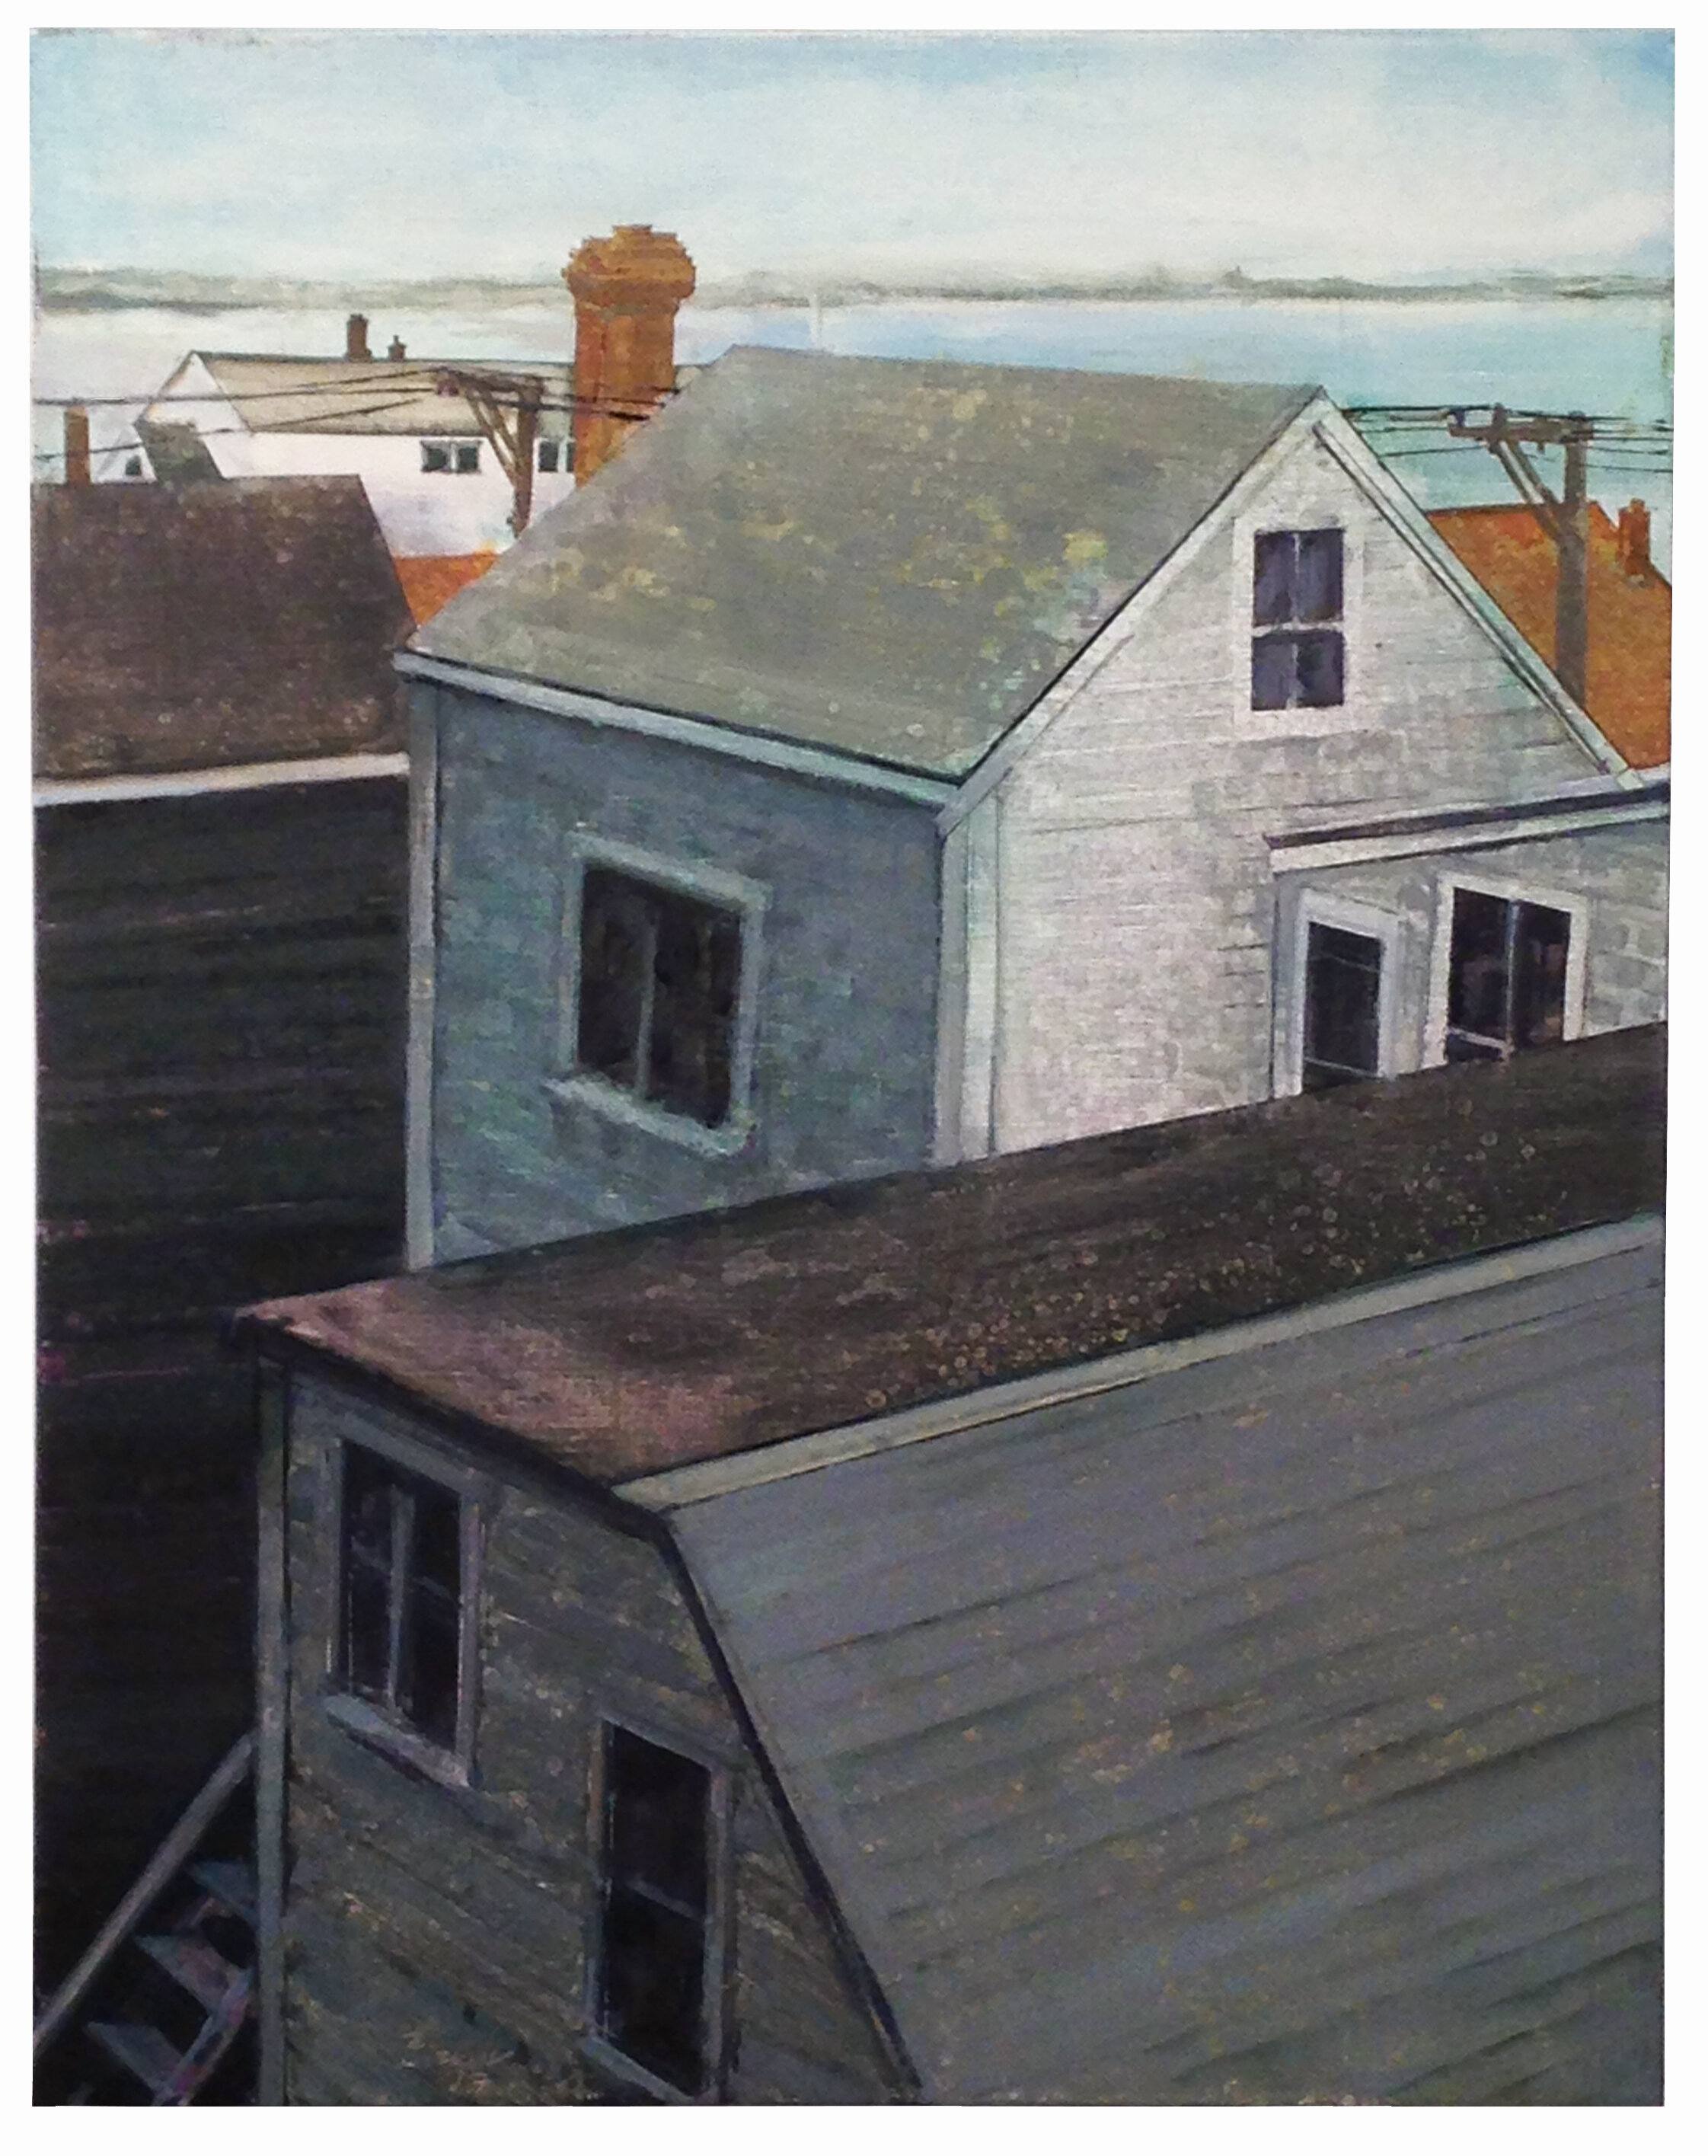  Provincetown Rooftops 1 24 x 19 inches Oil on linen 2017 